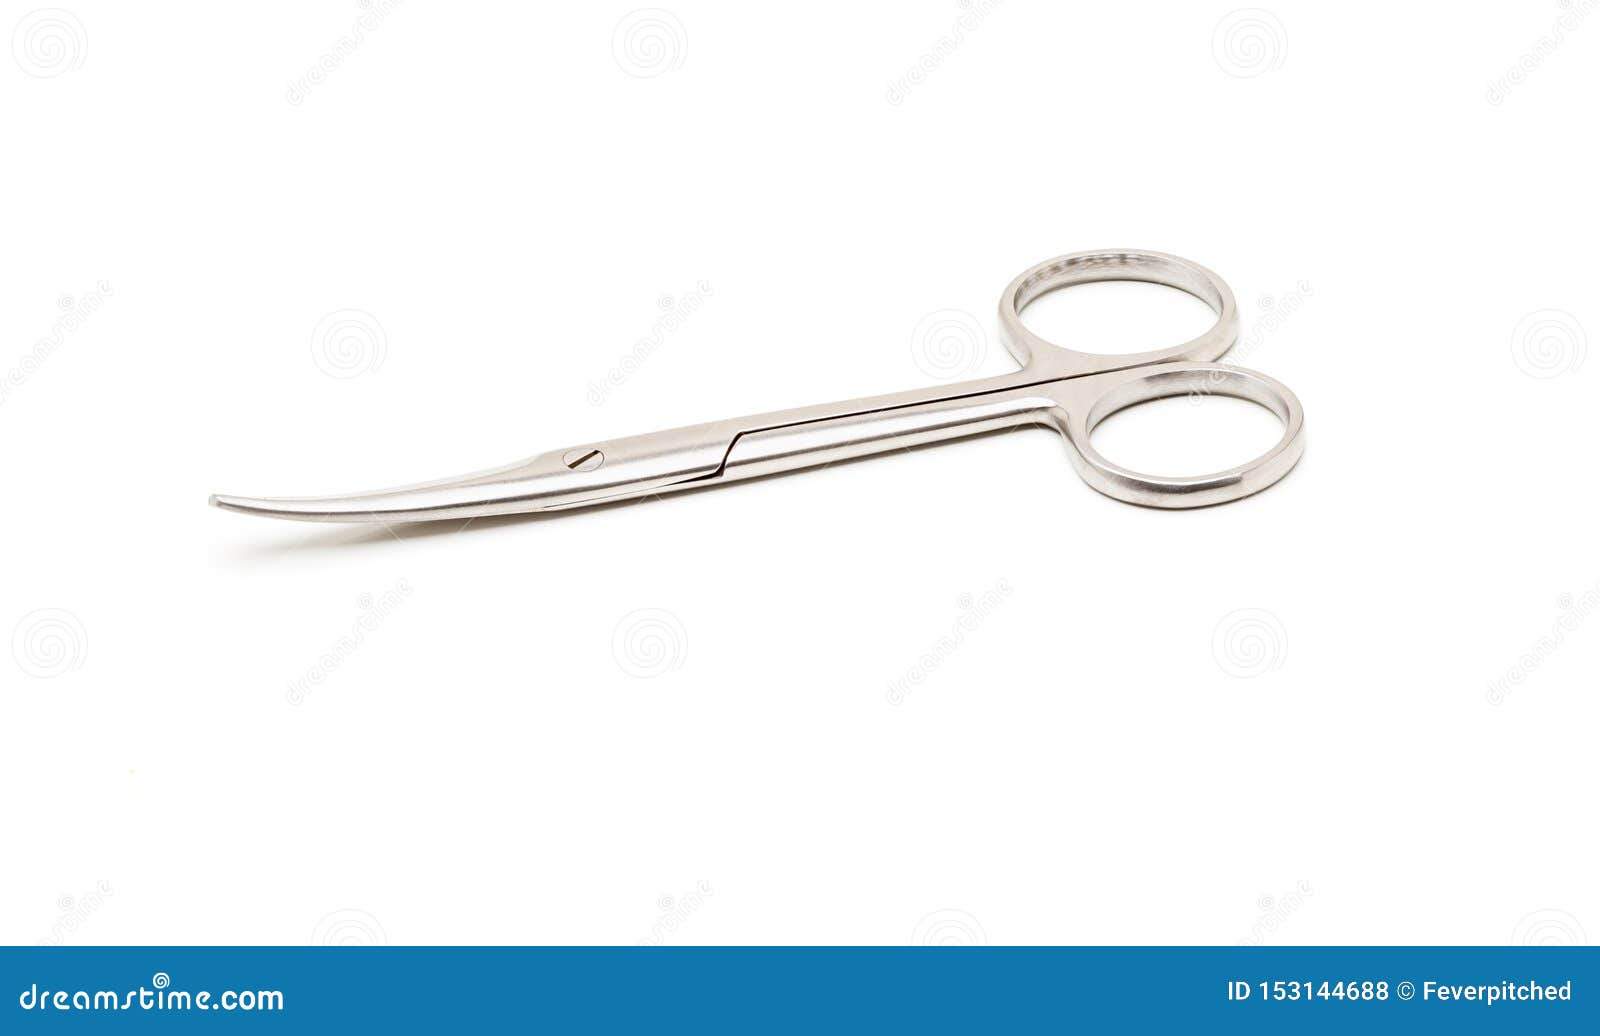 Stainless Steel Precision Surgical Medical Instrument Isolated on White ...